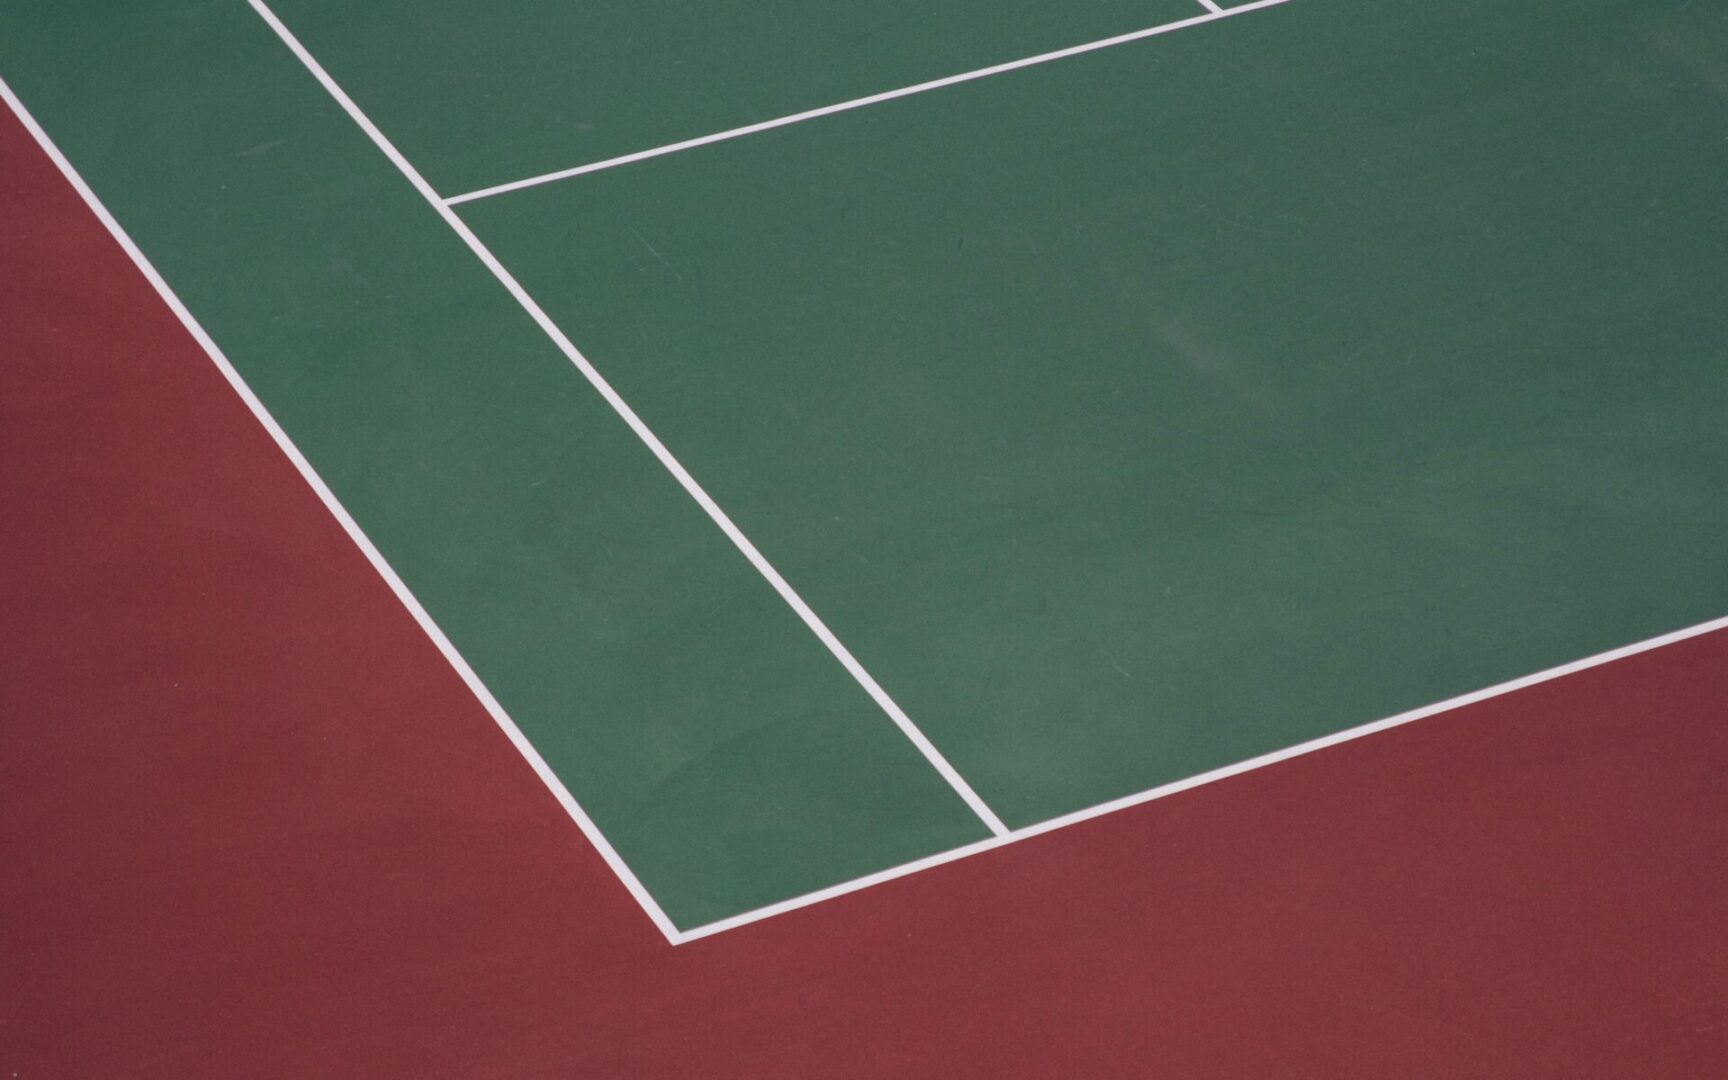 A tennis court with two different colors of green and white.